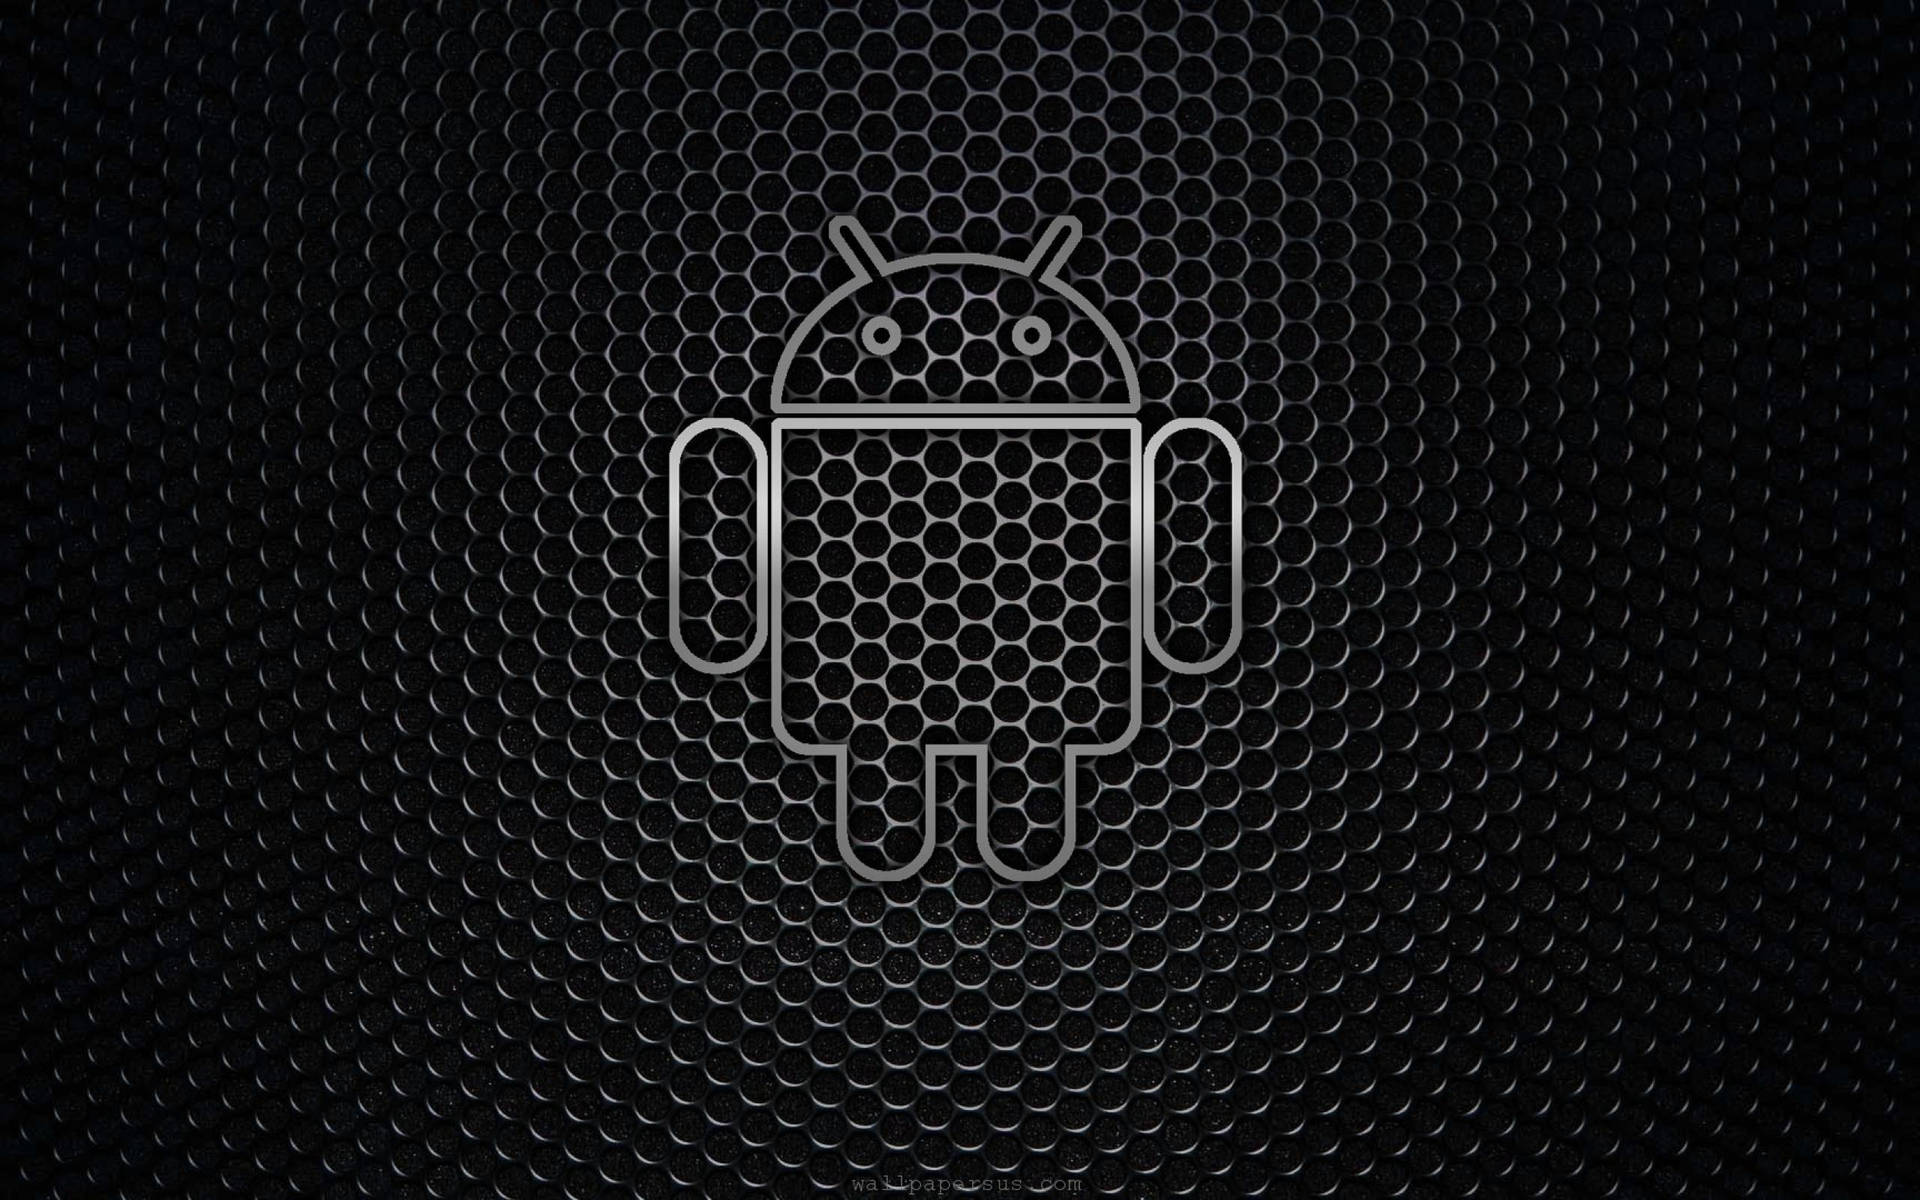 The Android robot stands surrounded by a hexagonal mesh Wallpaper